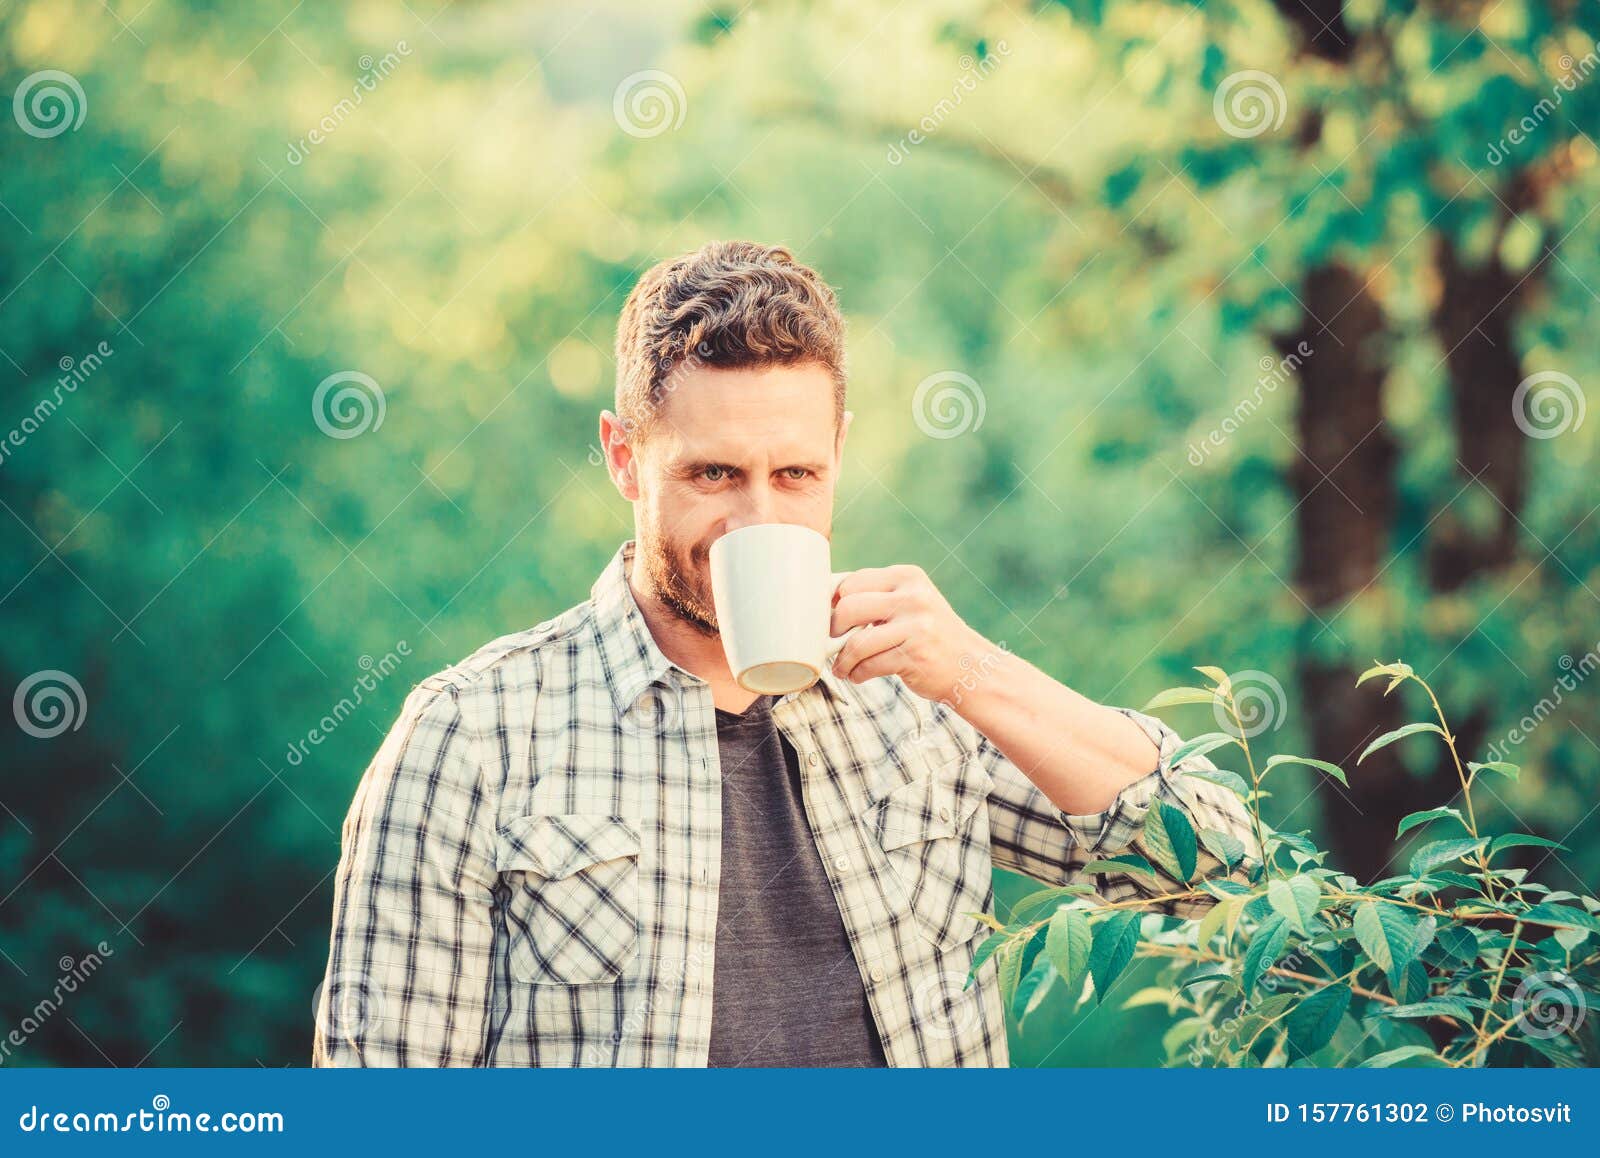 Tea Outdoor. Morning Coffee. Healthy Lifestyle. Nature and Health. Breakfast Refreshment Time. Ecological Life for Stock Photo - of 157761302